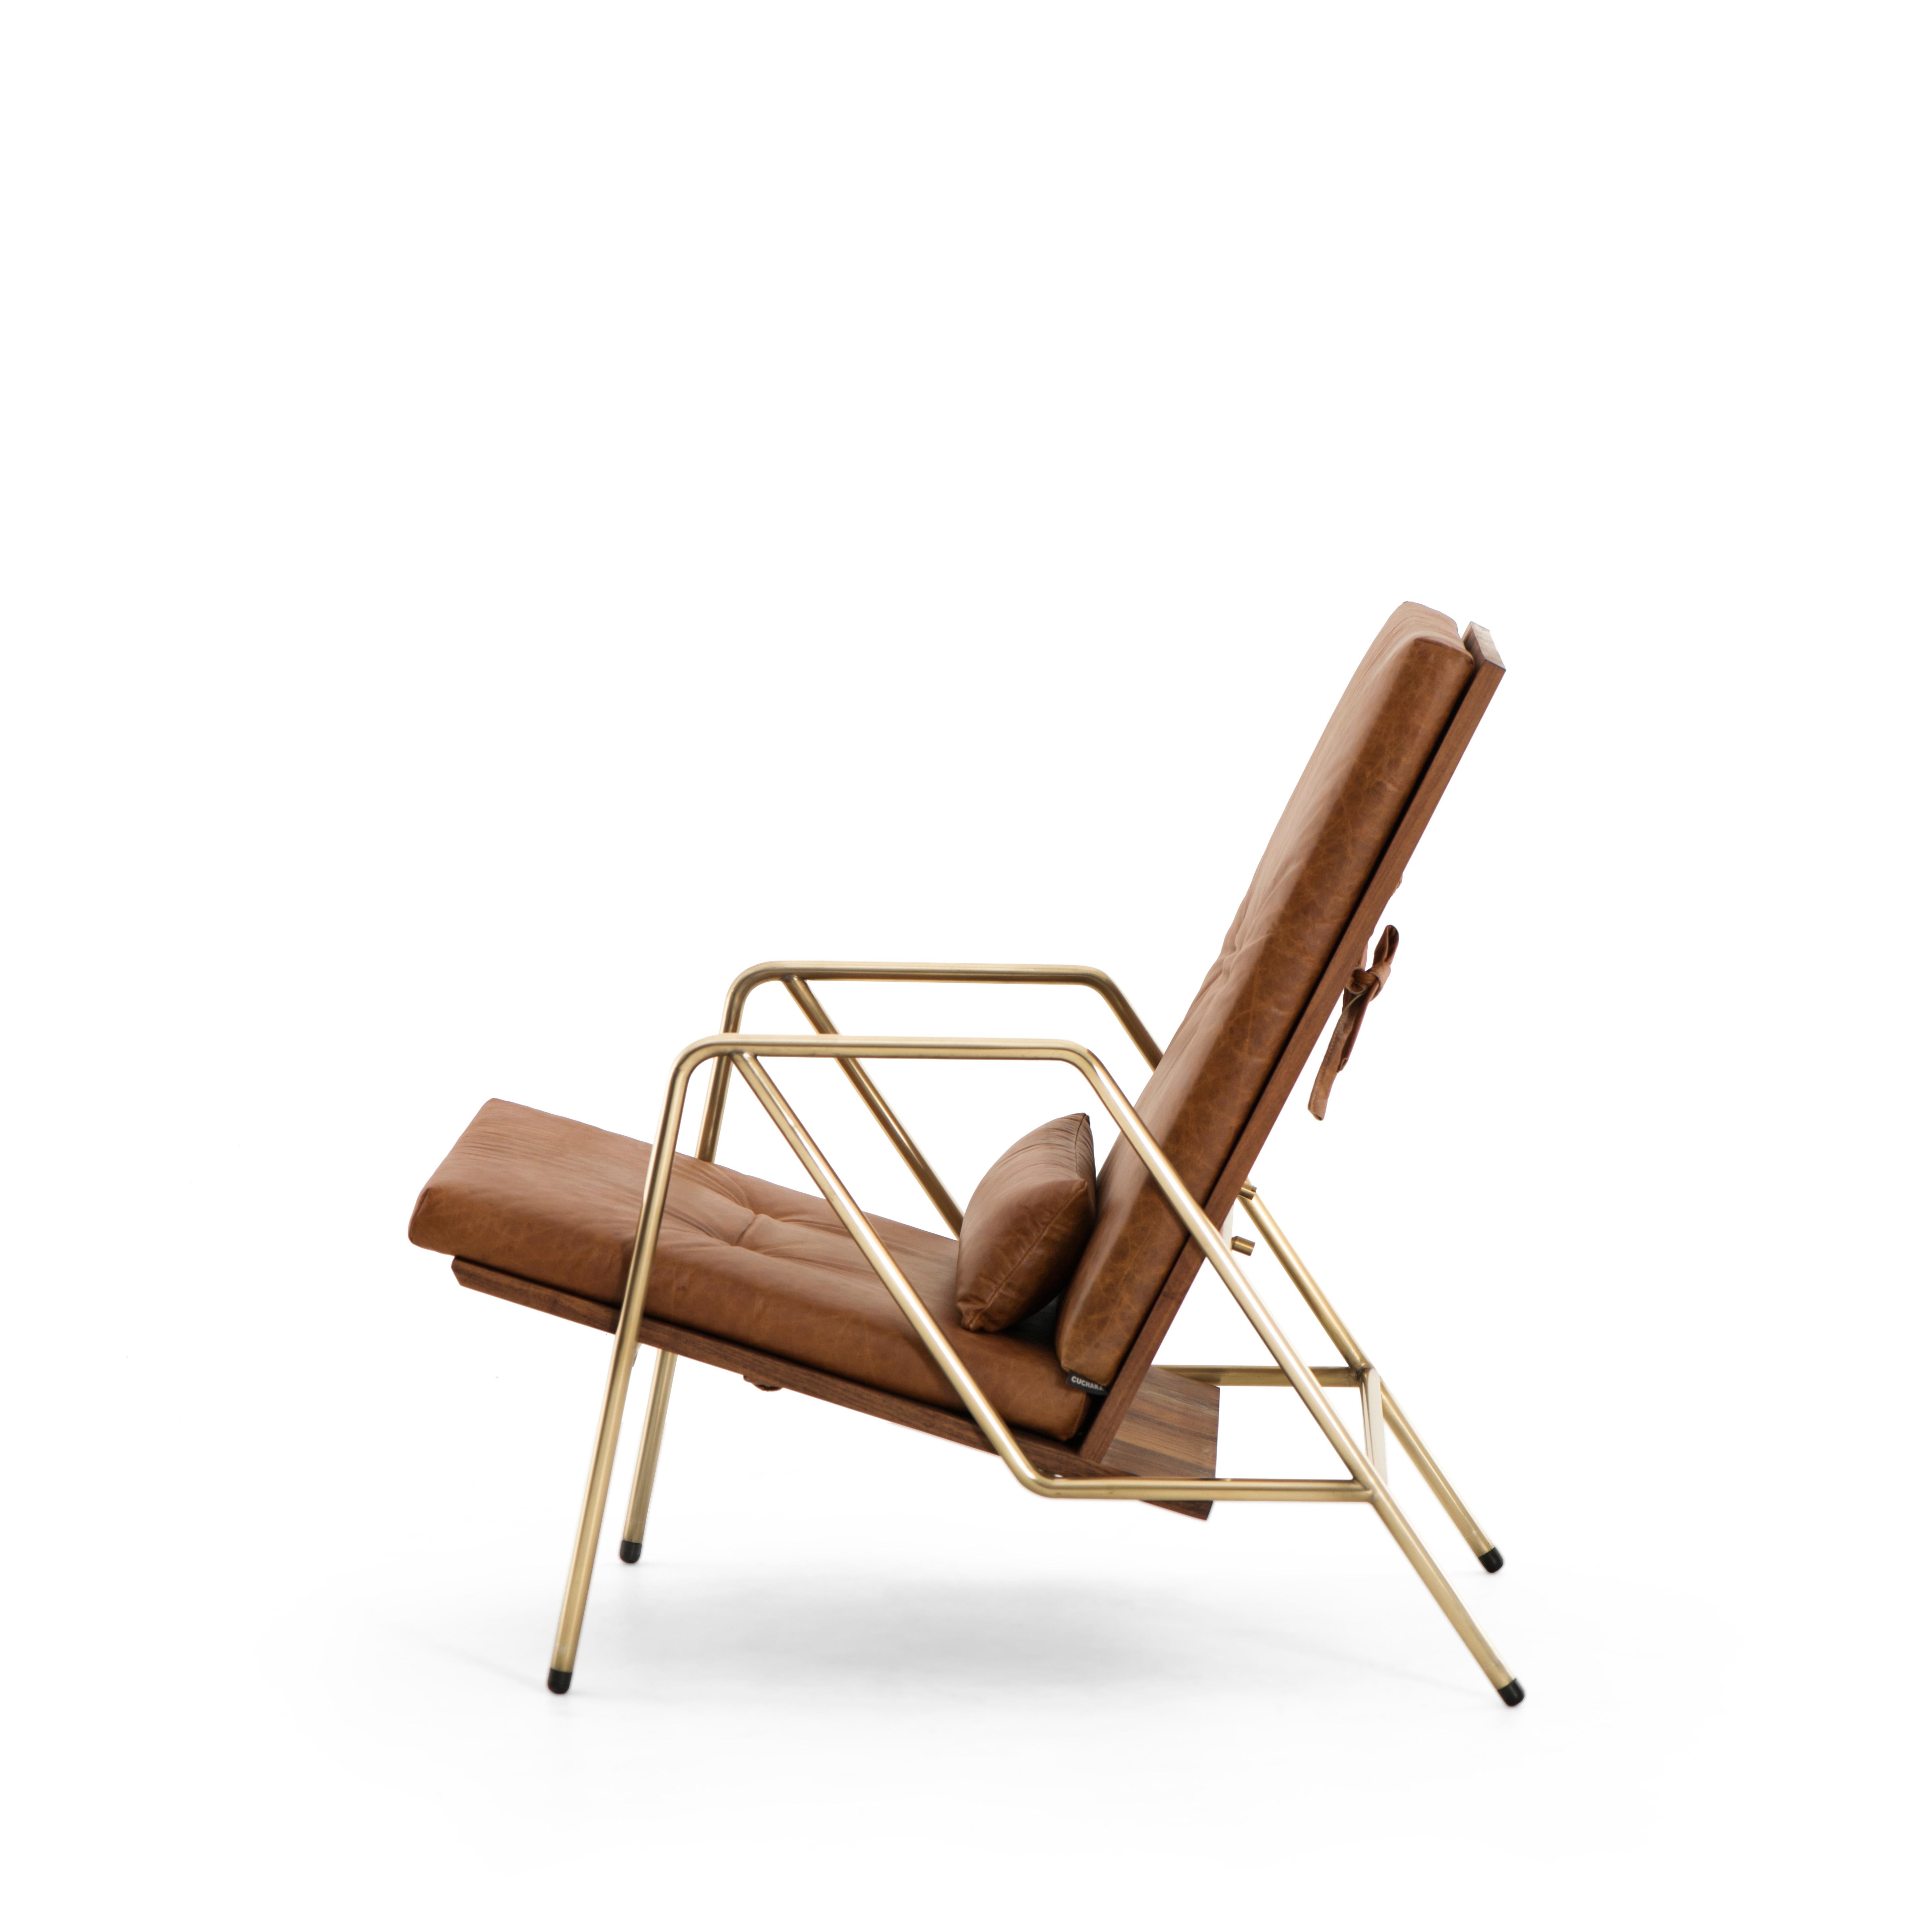 Modern Tumbona Duna, Mexican Contemporary Lounge Chair by Emiliano Molina for Cuchara For Sale